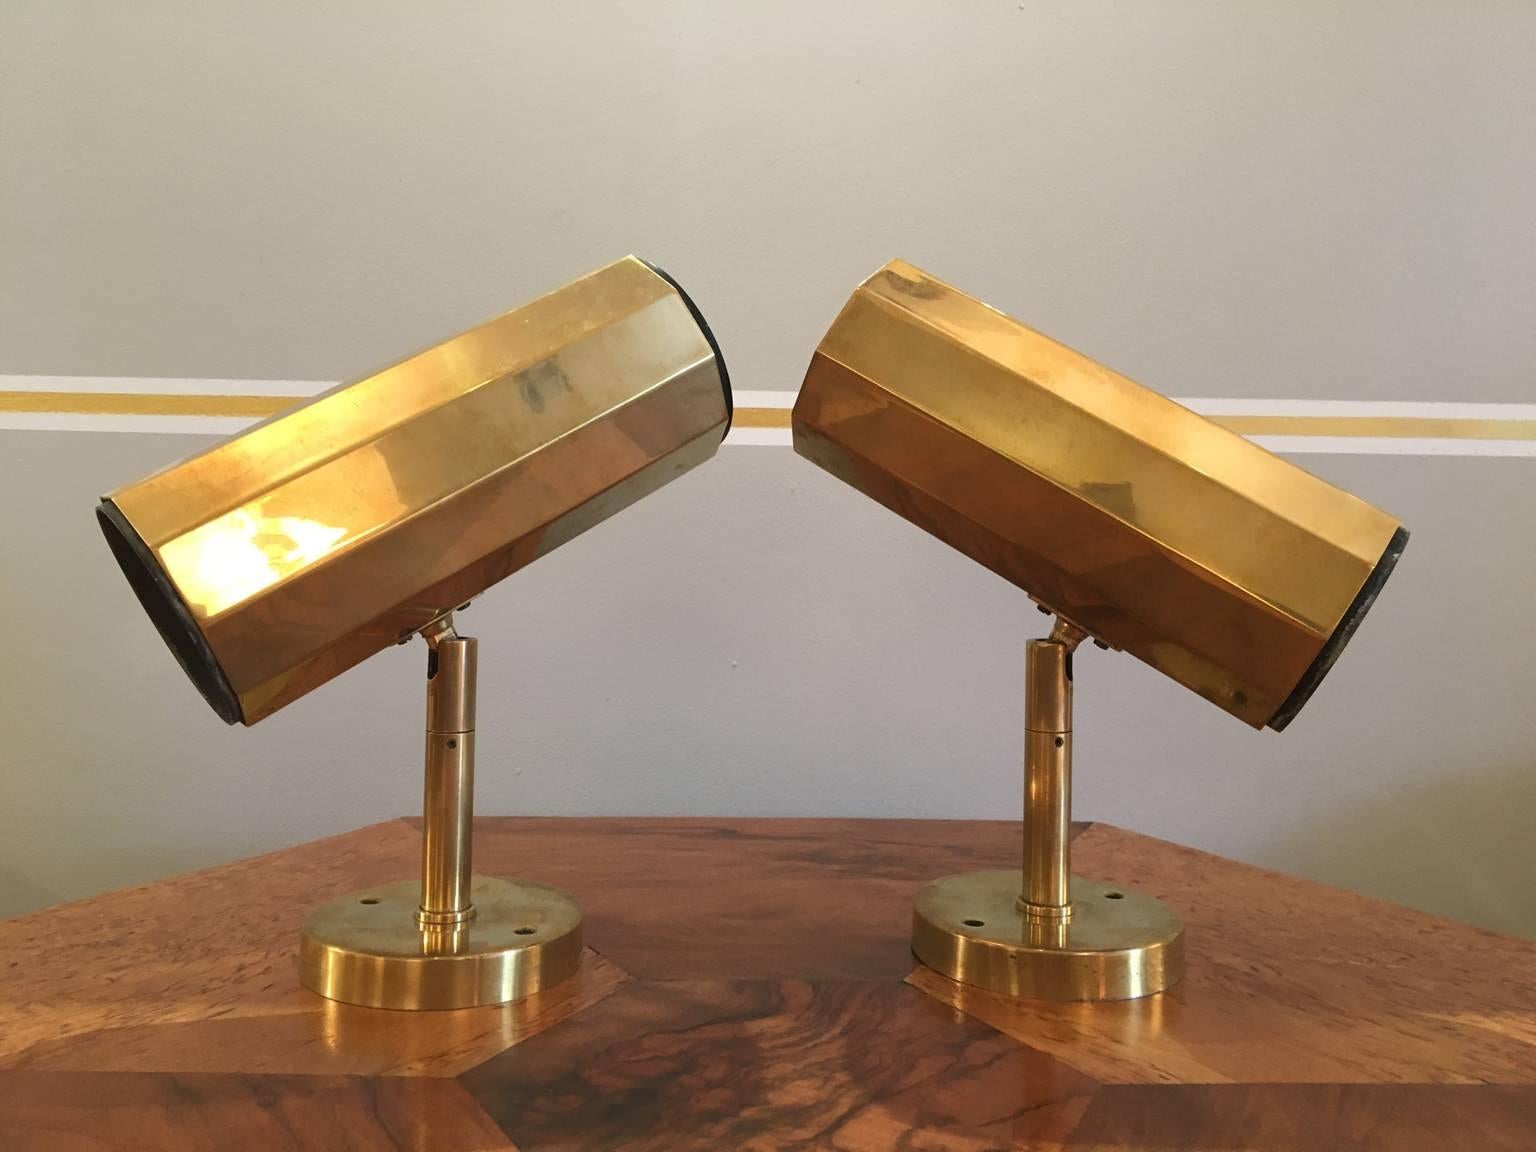 A pair of brass wall lights by Koch and Lowy OMI
Can be either wall or ceiling mounted
USA, circa 1970.